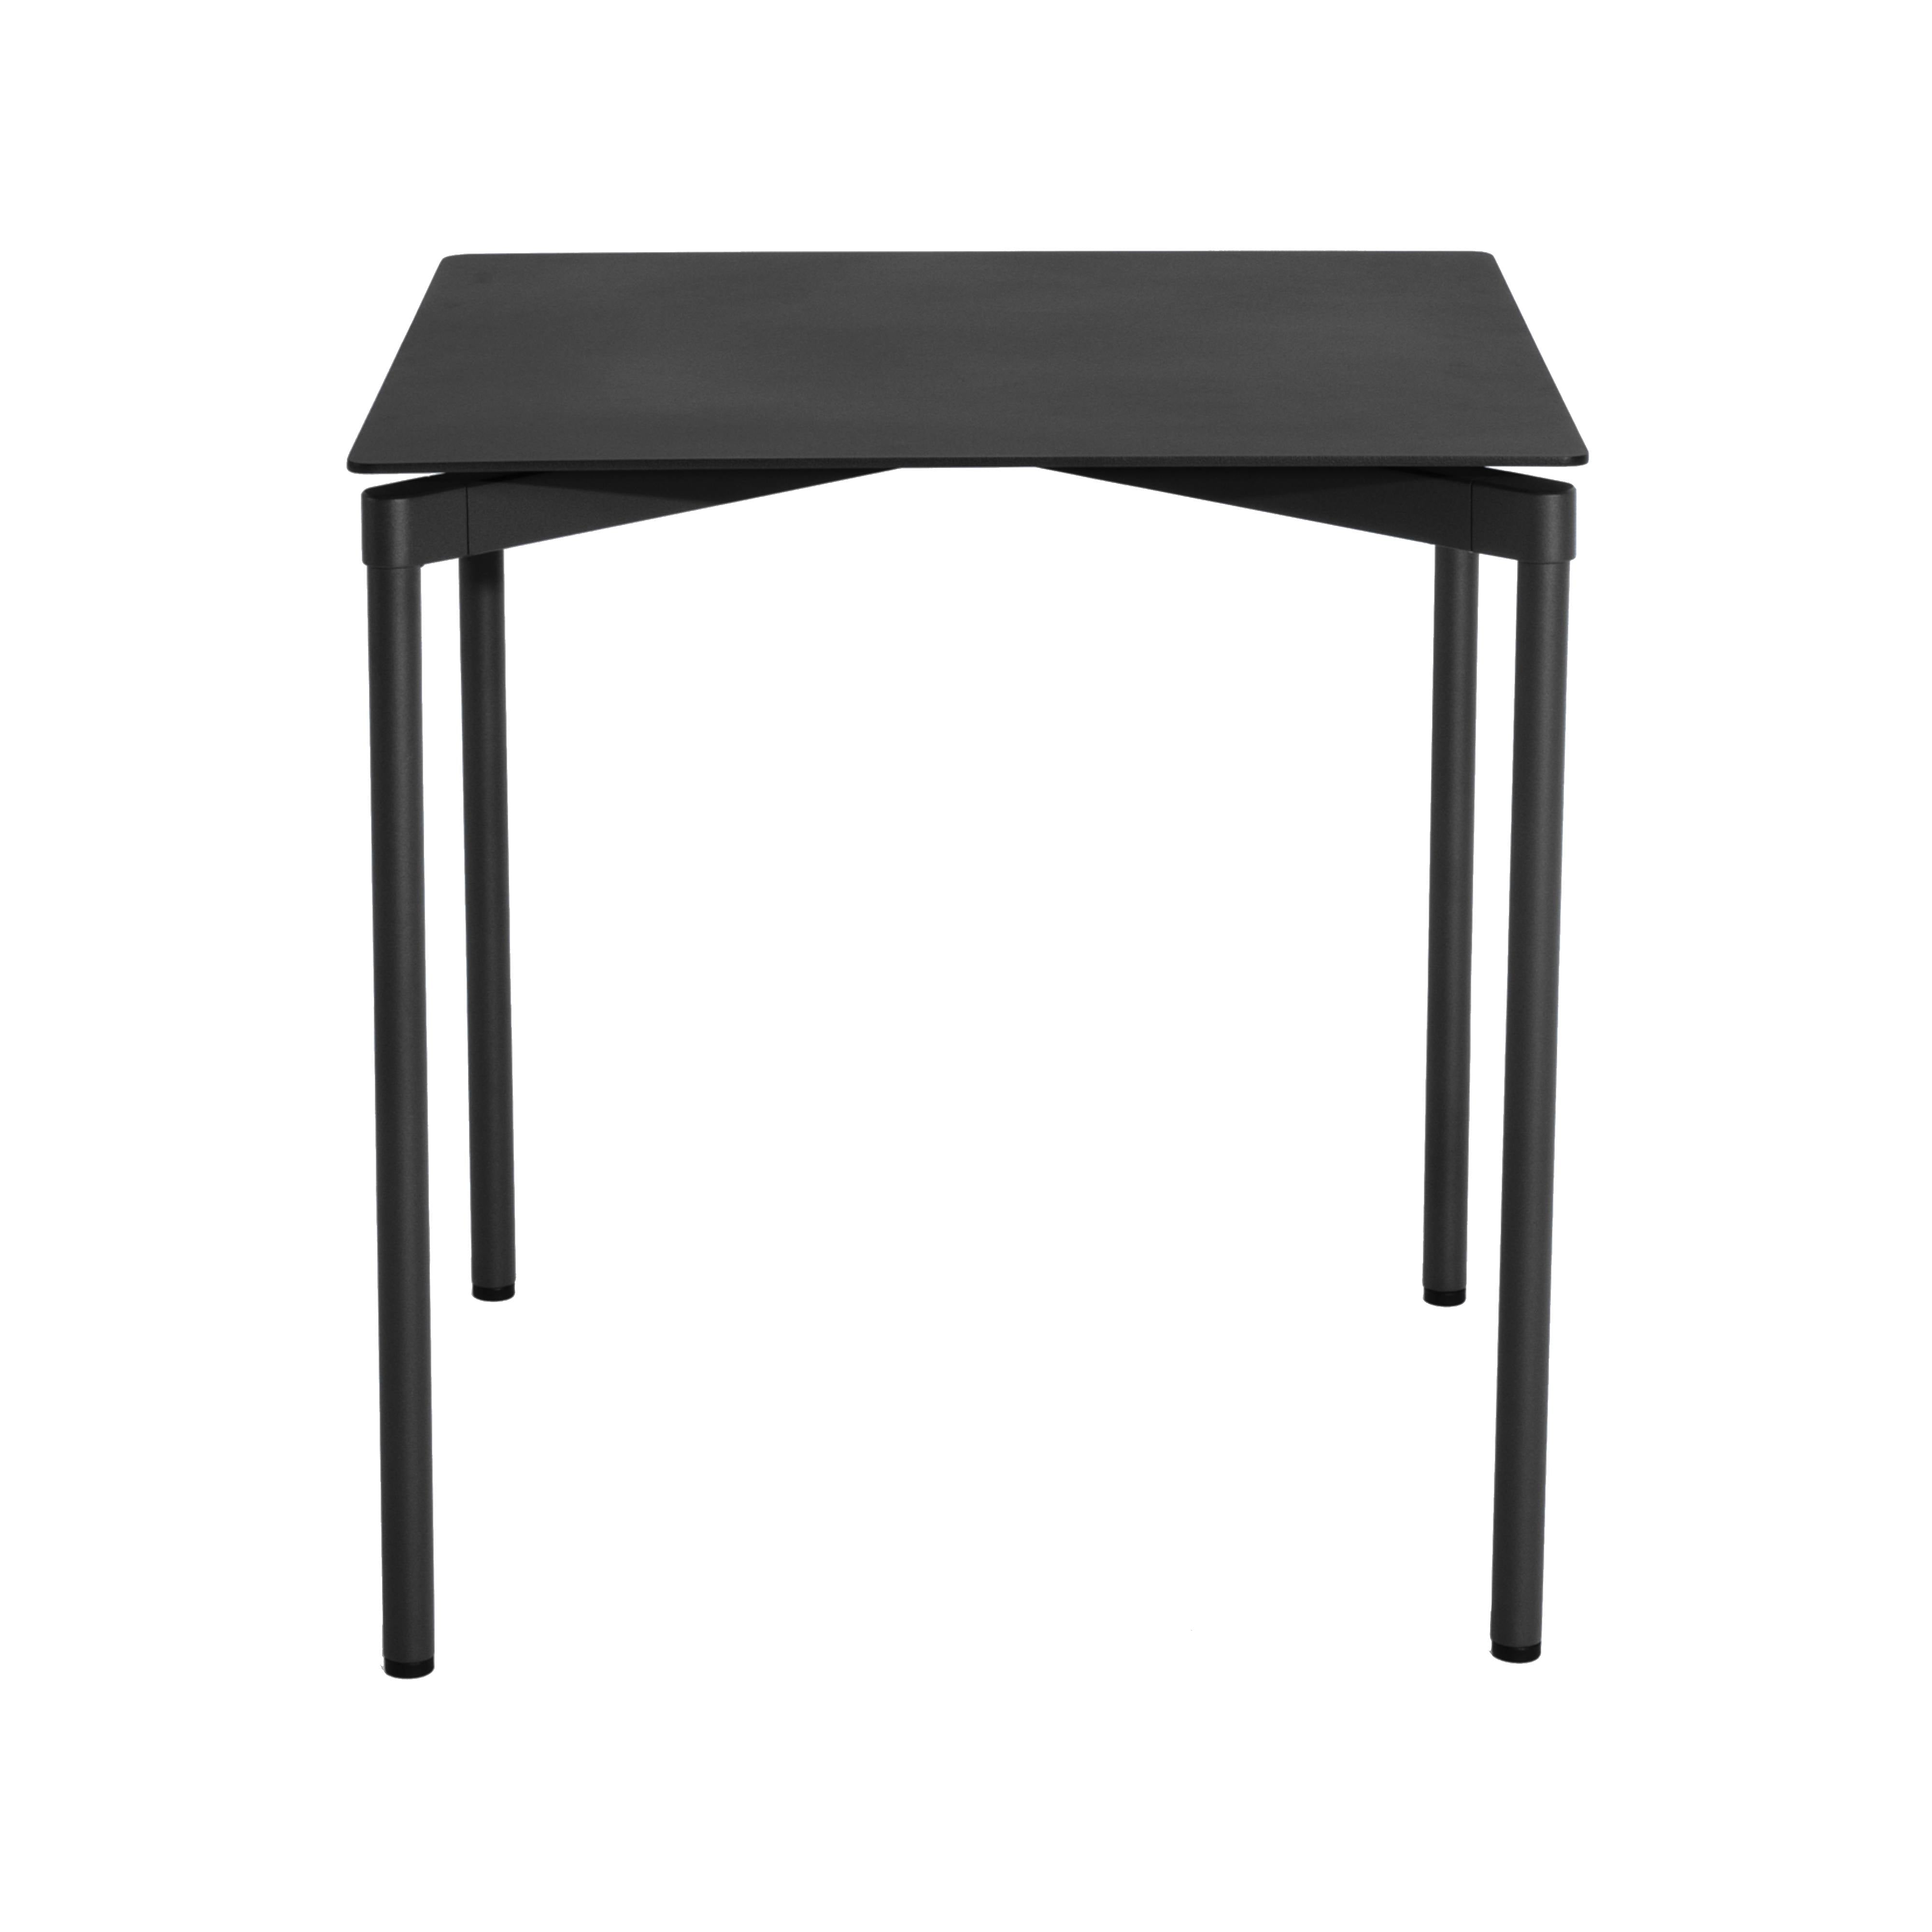 Fromme Dining Table: Square + Black